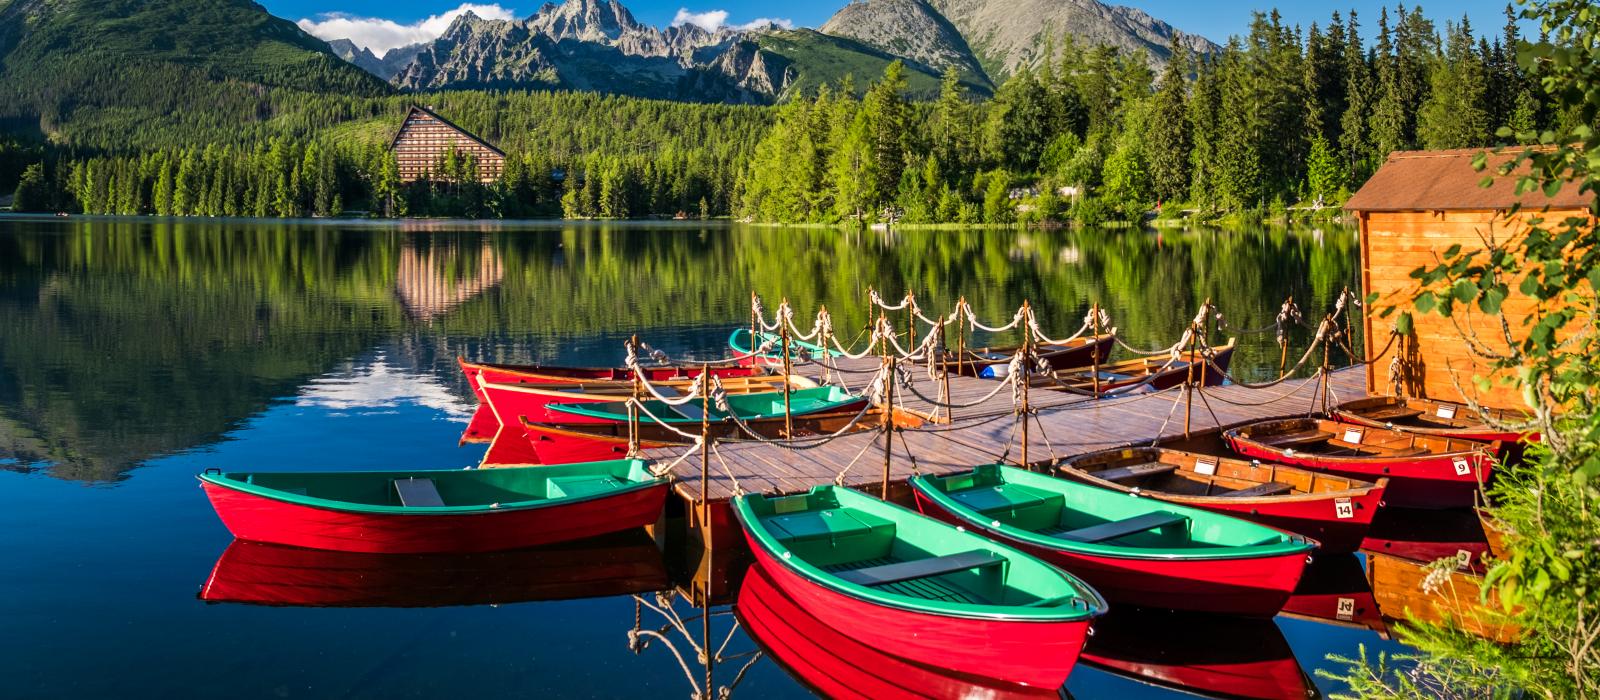 red row boats at dock on calm lake surrounded by green hills